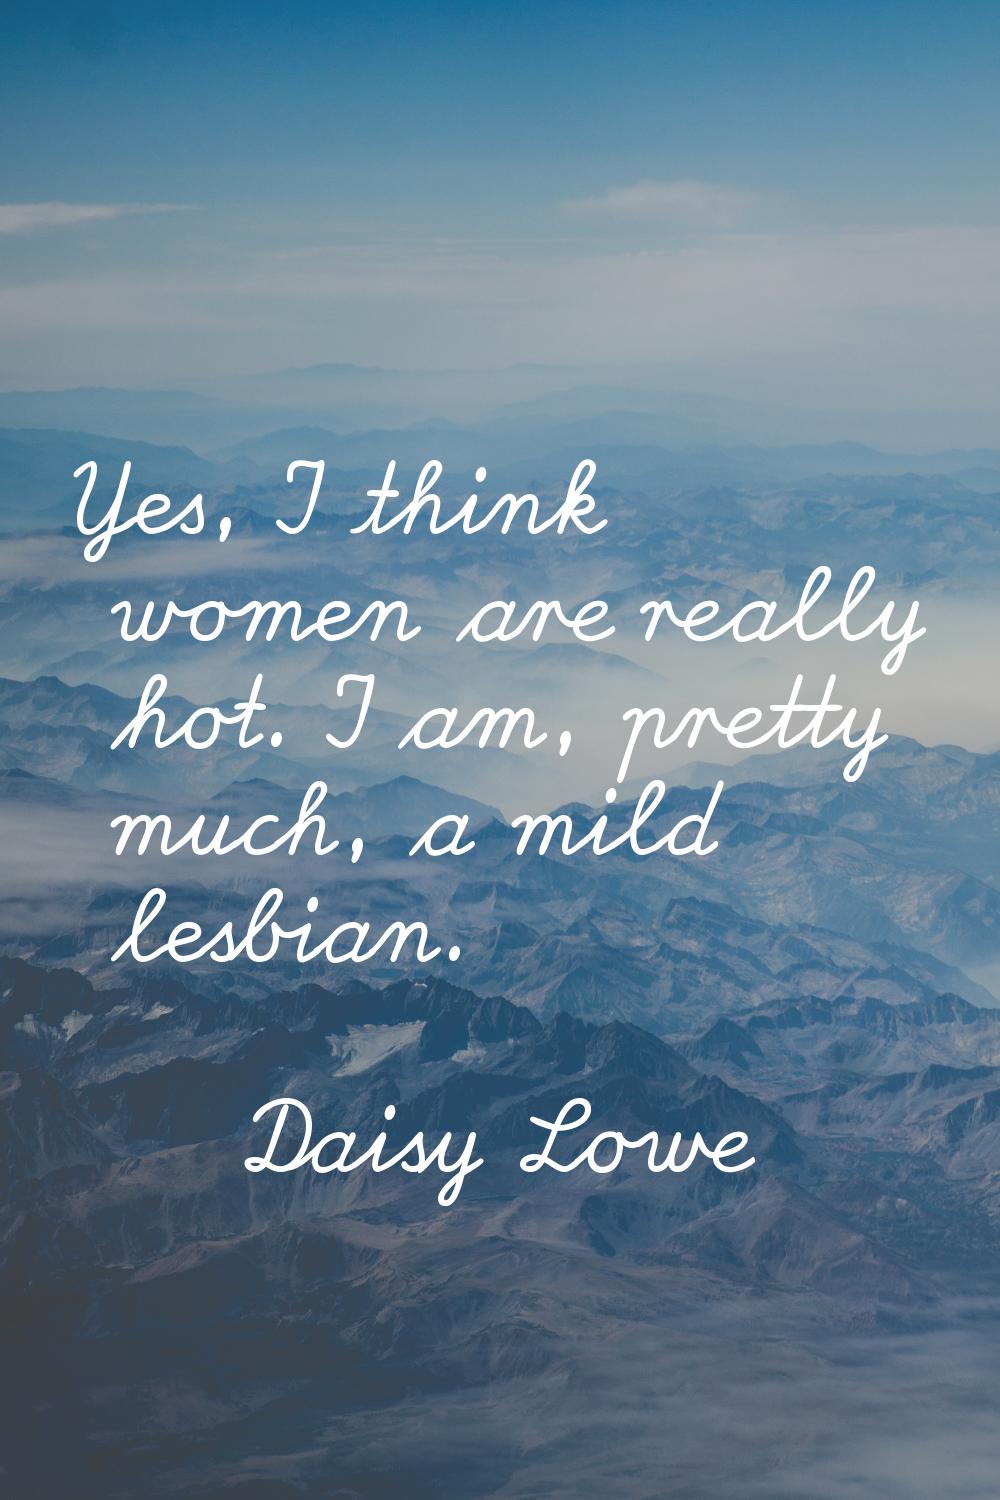 Yes, I think women are really hot. I am, pretty much, a mild lesbian.